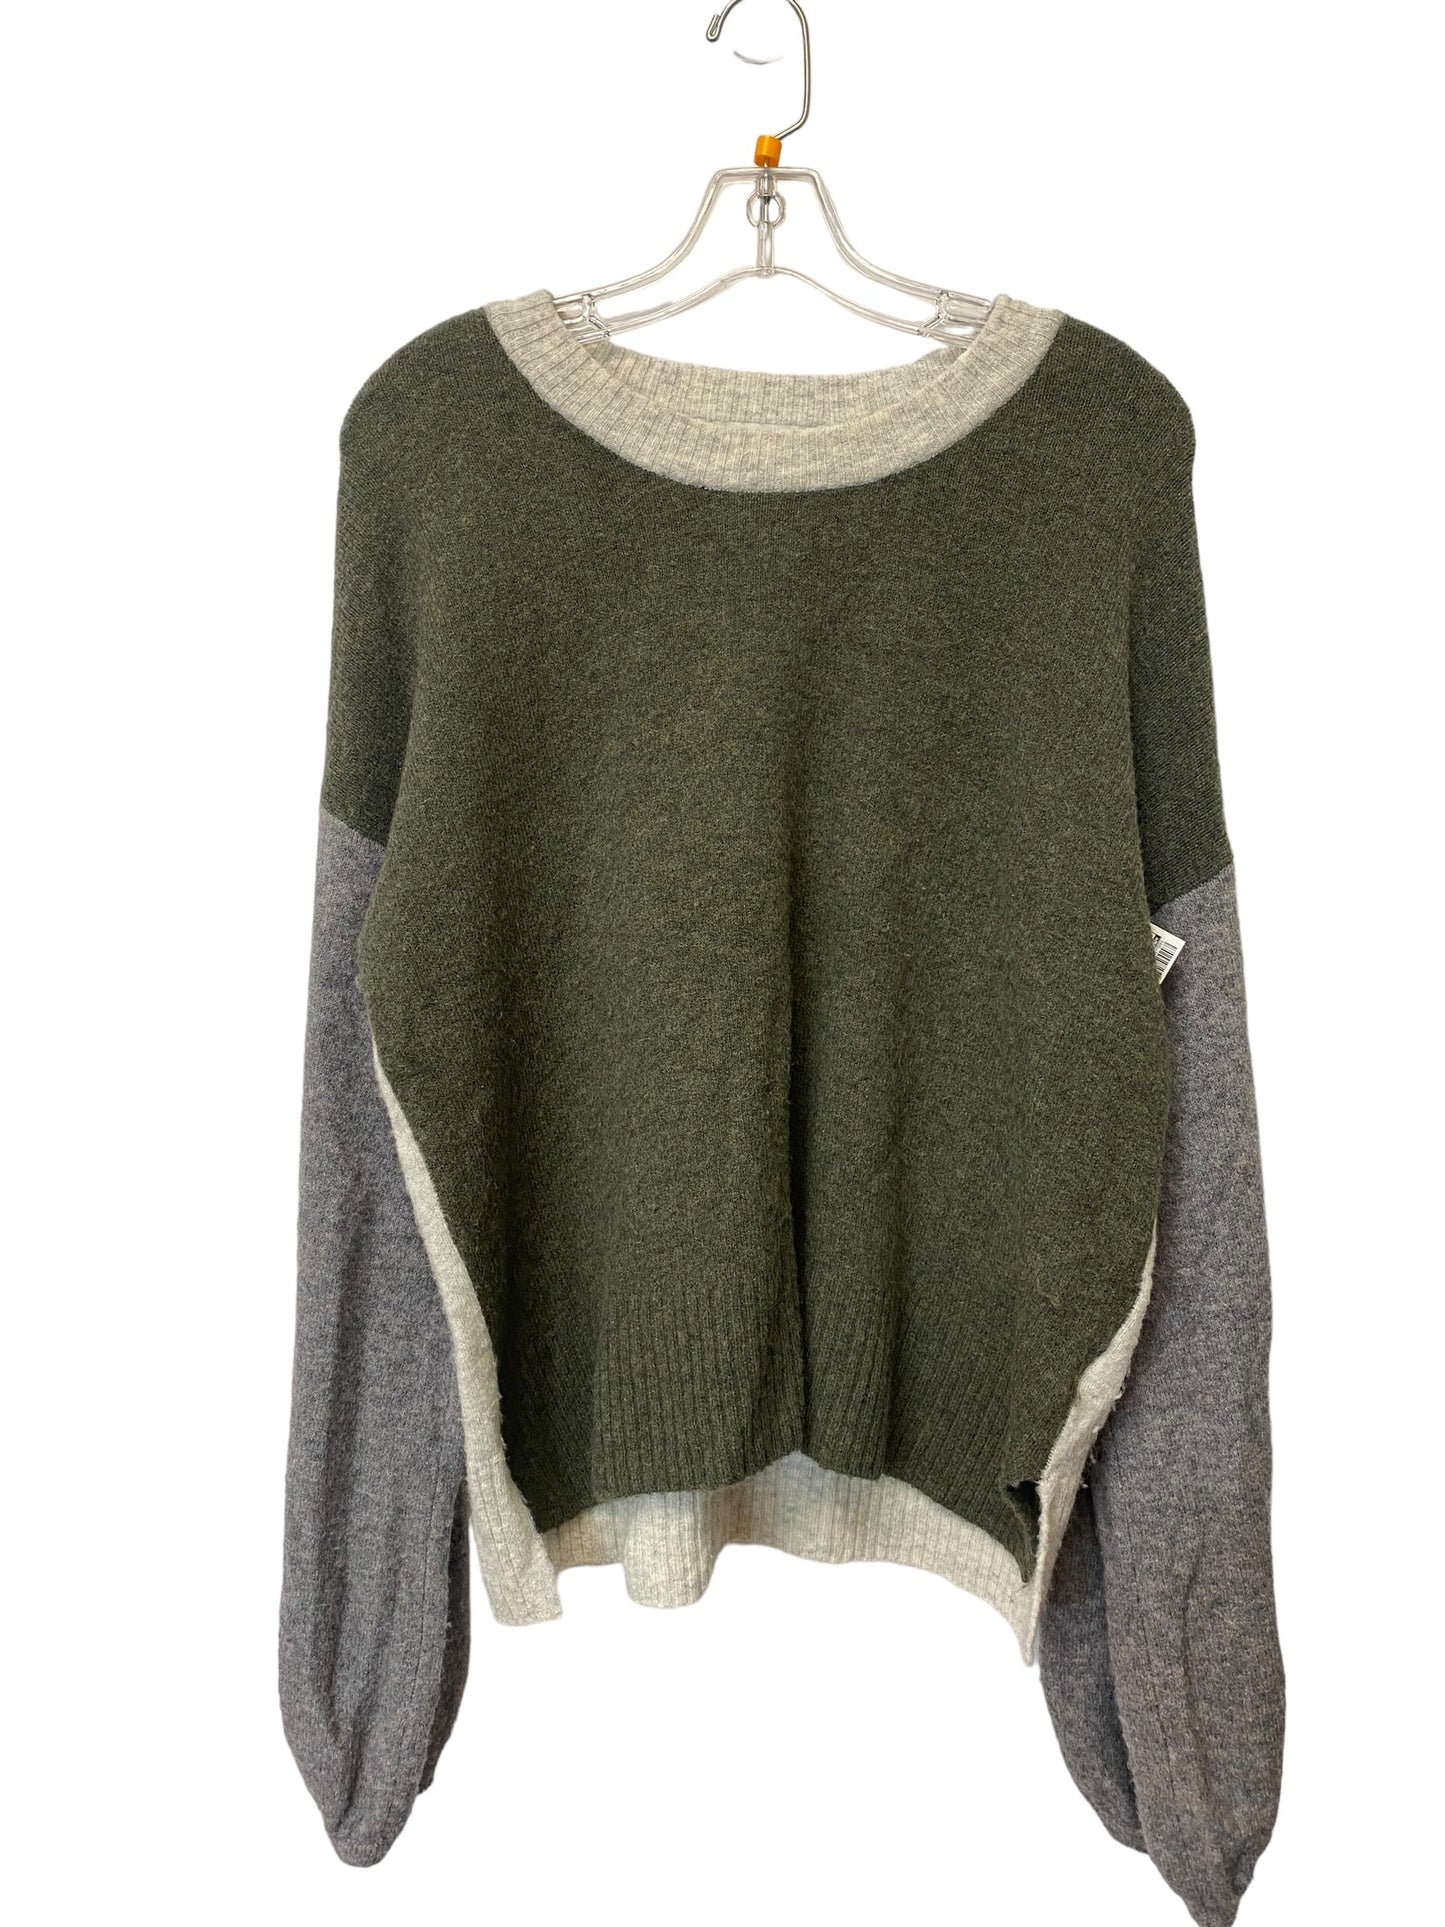 Green & Grey Sweater Madewell, Size M